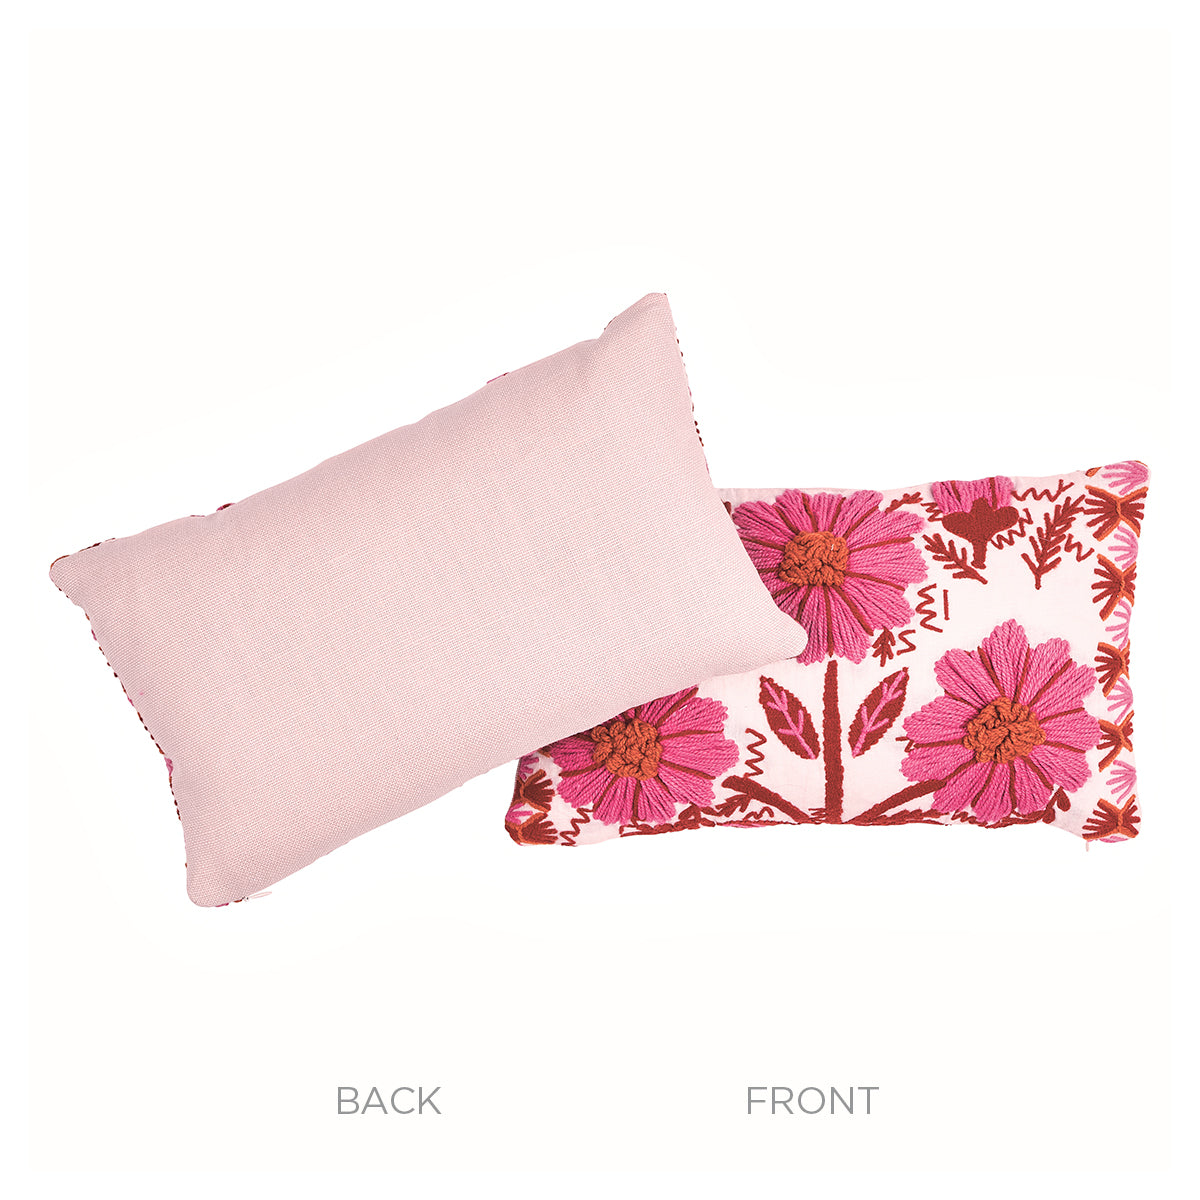 Marguerite Embroidery Pillow A | Blossom